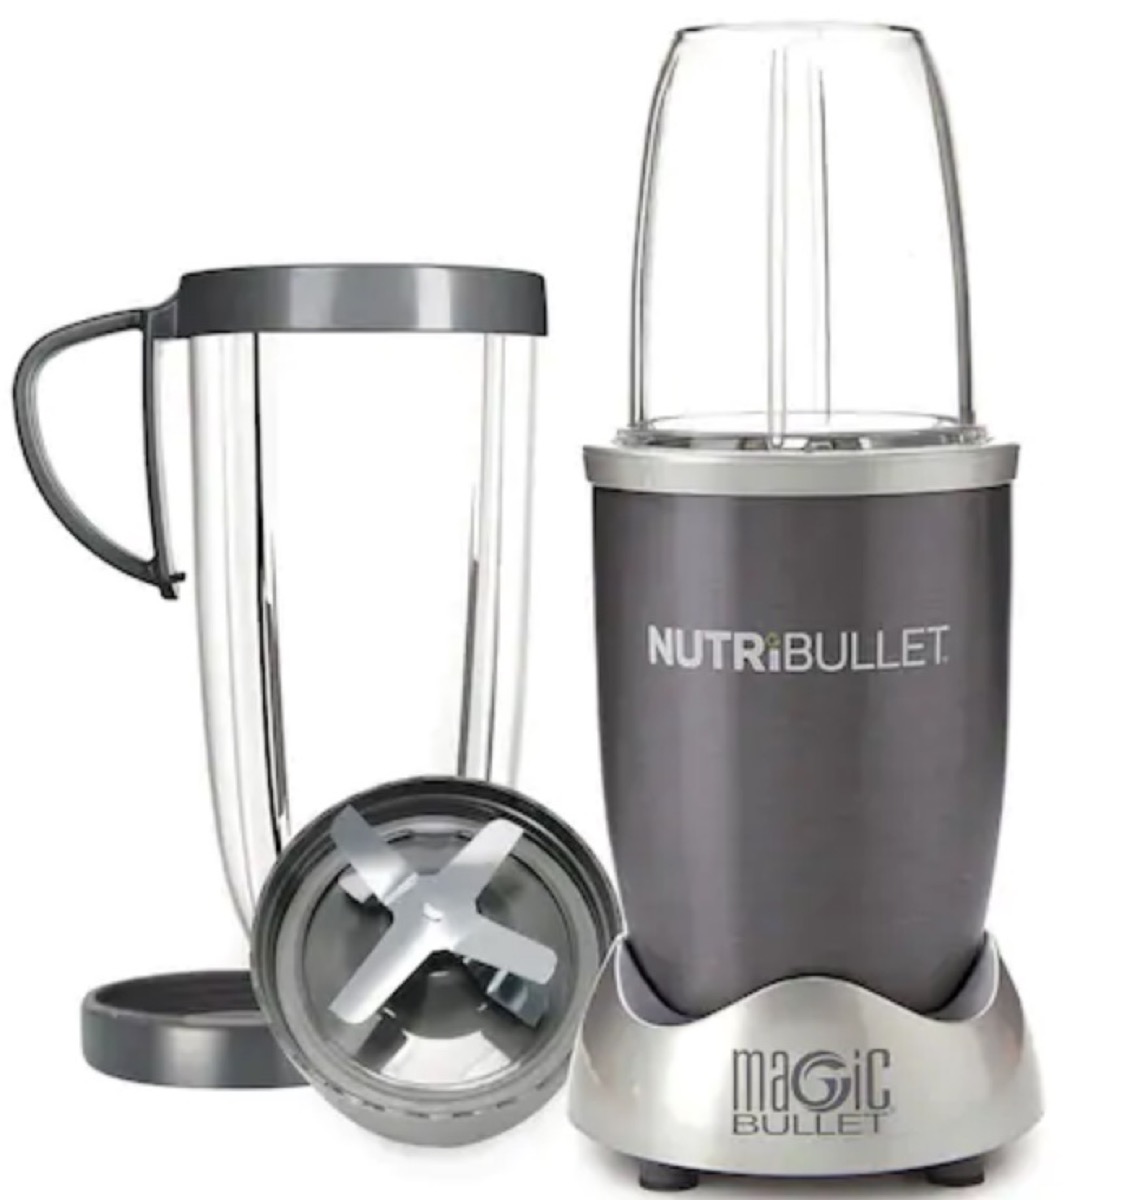 gray nutribullet blender and accessories